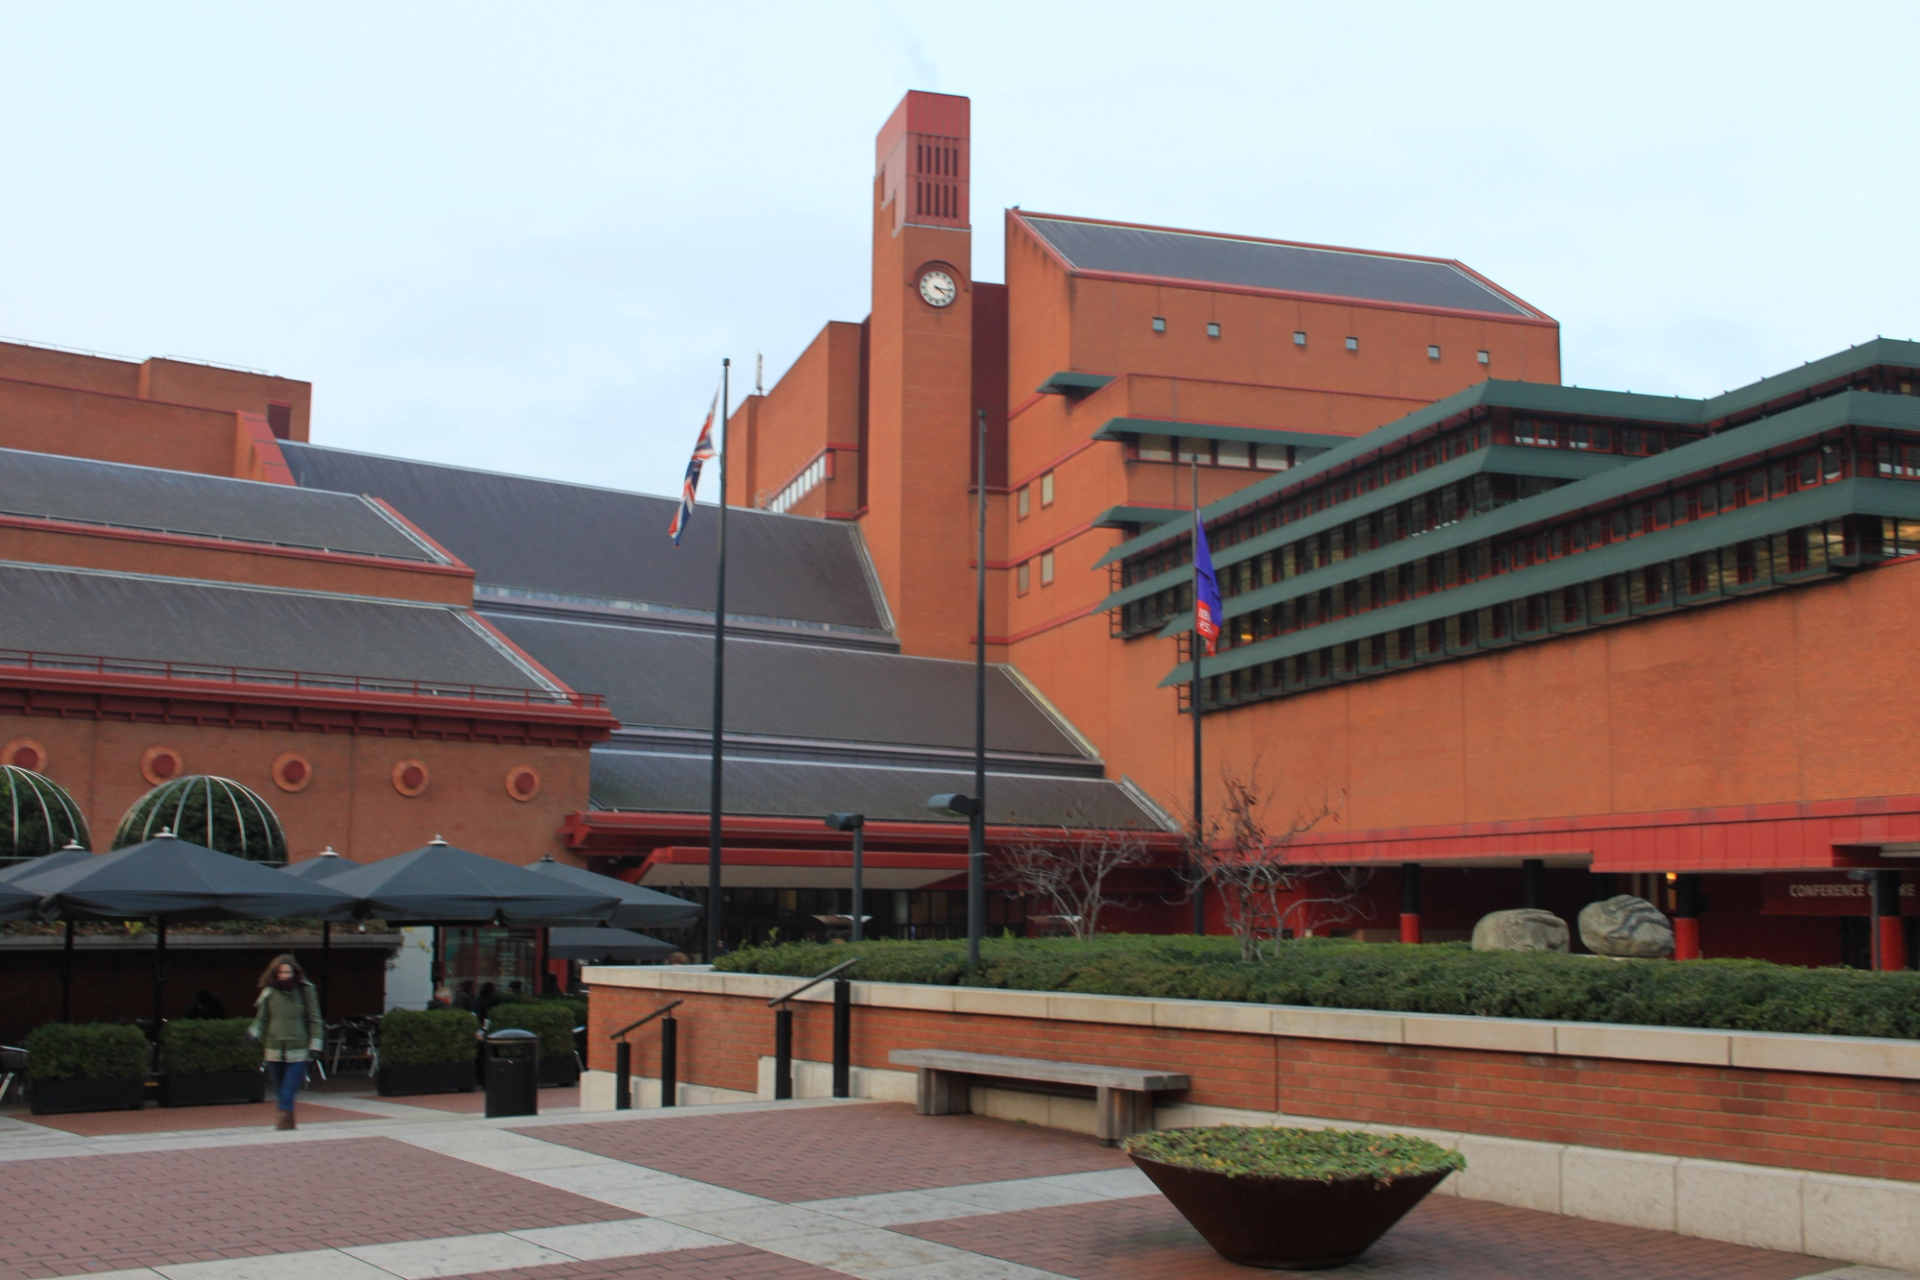 An image of the outside of the British Library in London, showing a large, geometric red brick building.